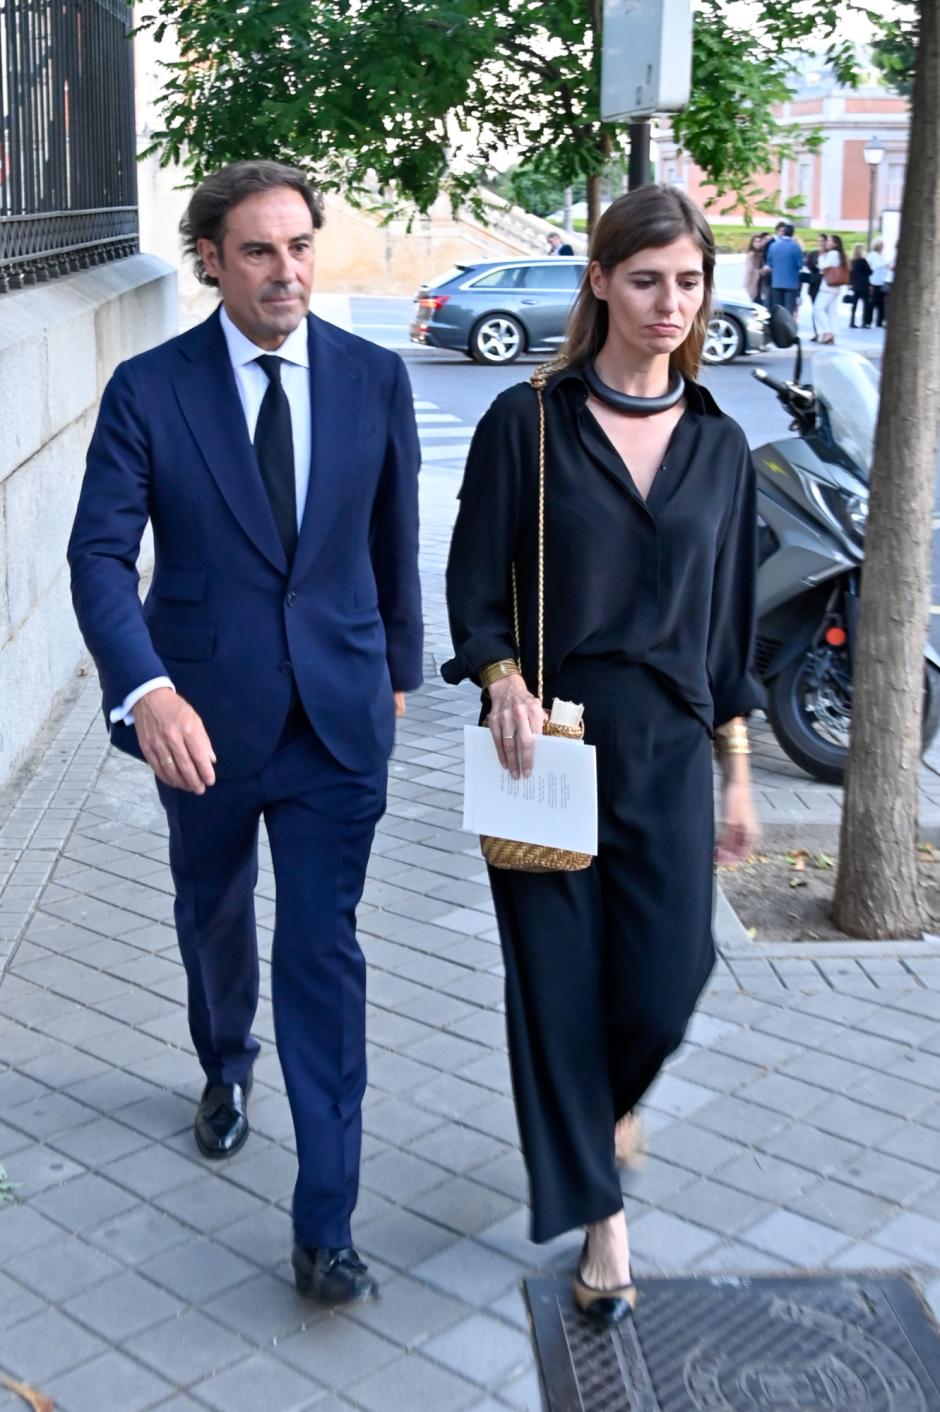 Miguel Baez El Litri, Casilda Ybarra during the funeral of Concha Spinola in Madrid on Tuesday, June 21, 2022.